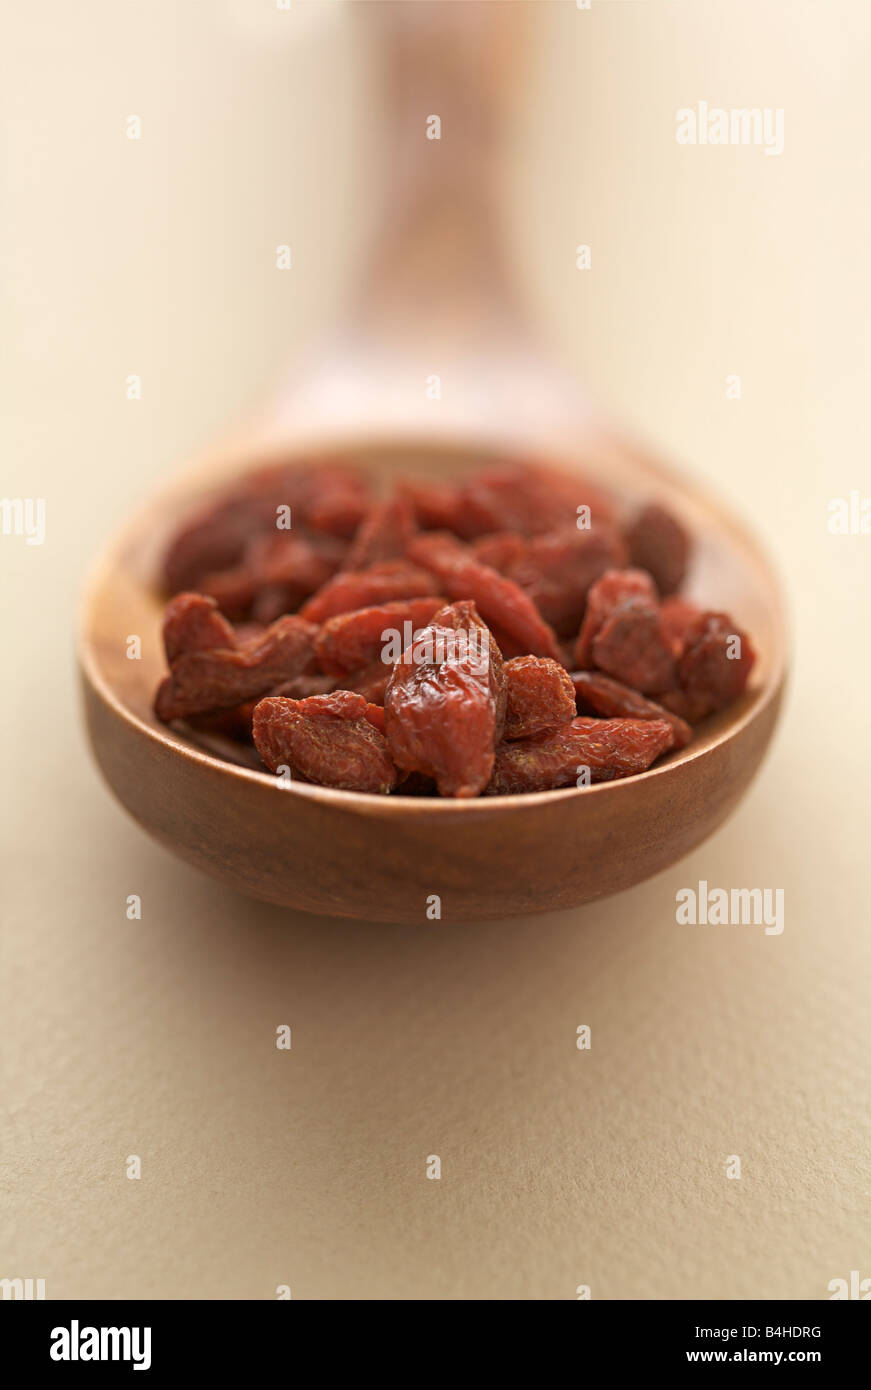 Dried goji berries close up, traditional Chinese medicine Stock Photo